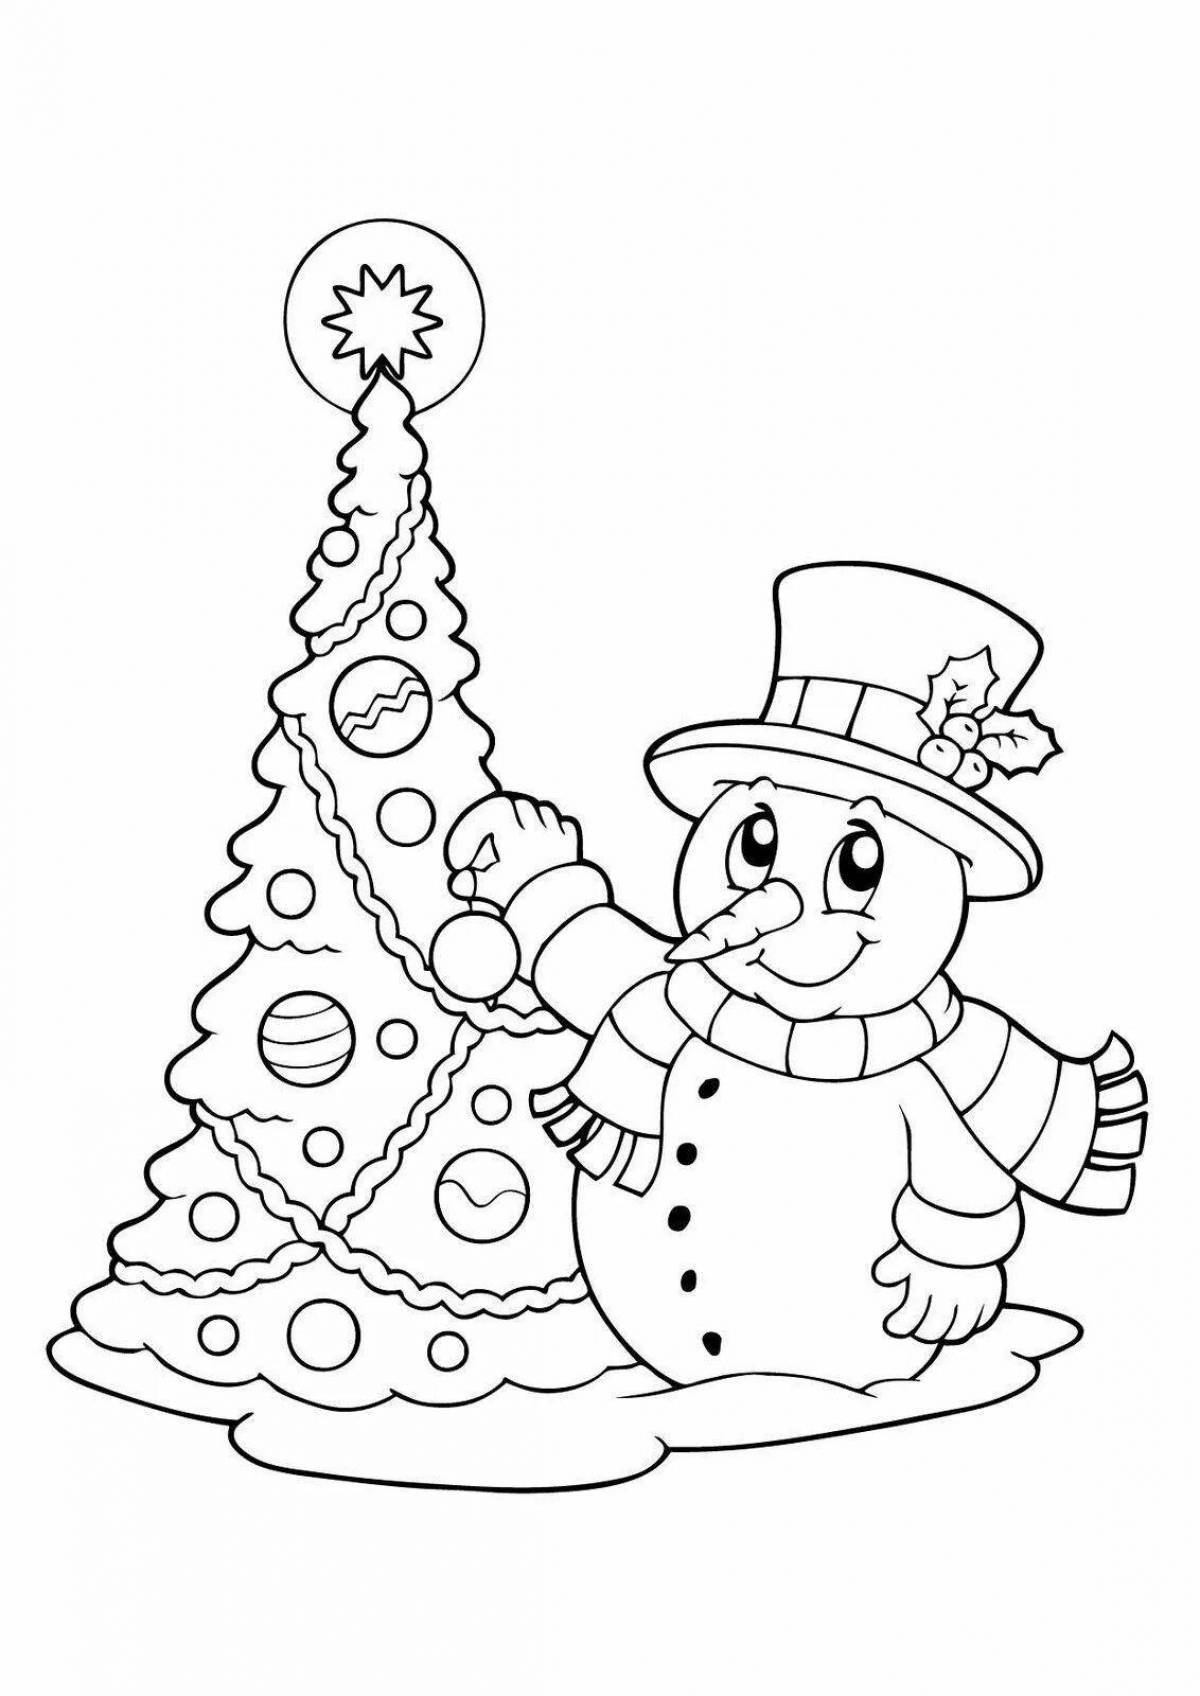 Tree and snowman #3